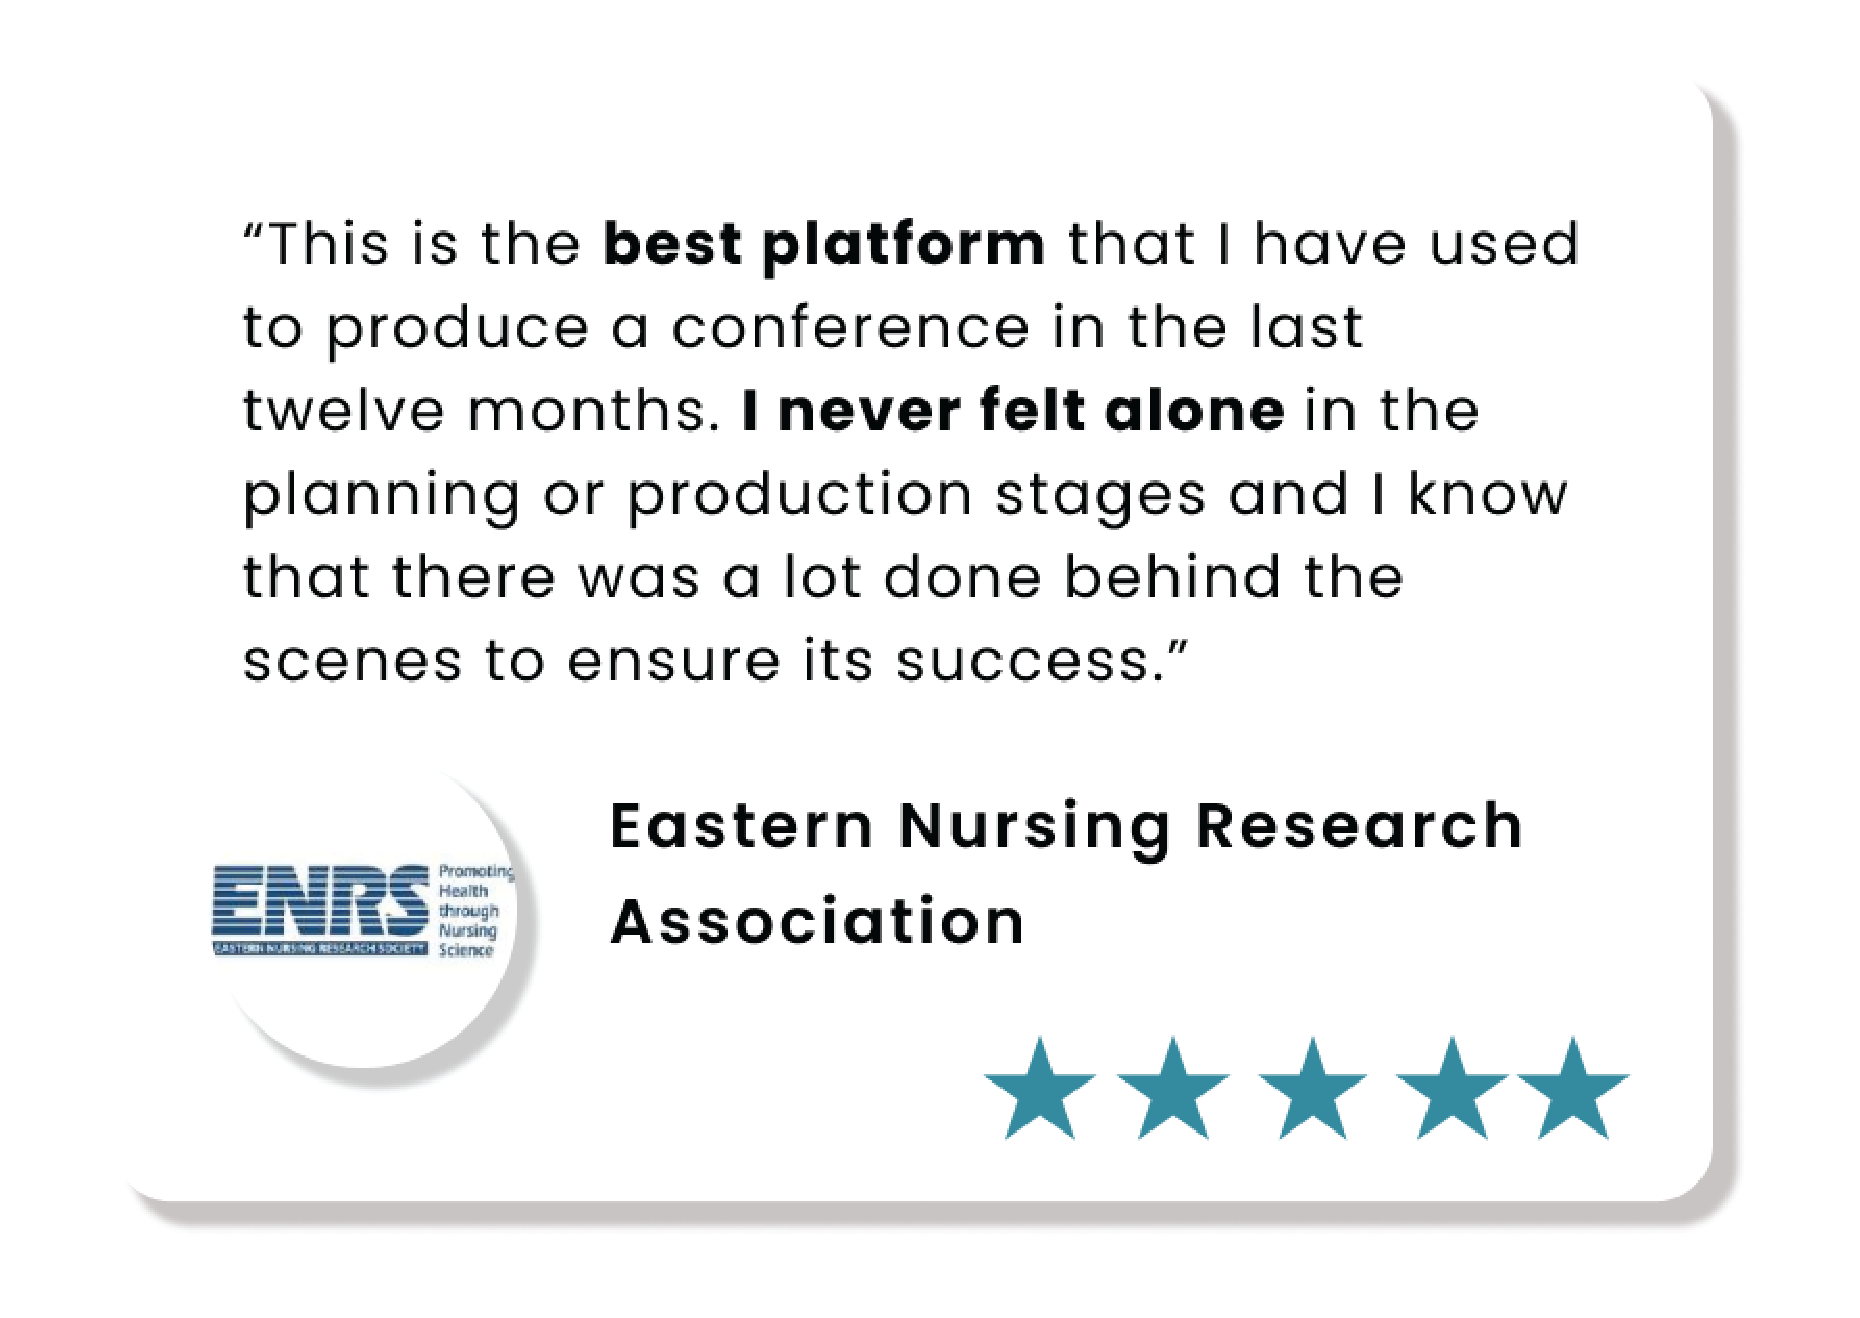 This is the best platform that I've used to produce a conference in the last twelve months. I never felt alone in the planning or production stages and I know that there was a lot done behind the scenes to ensure its success. - Eastern Nursing Research Association